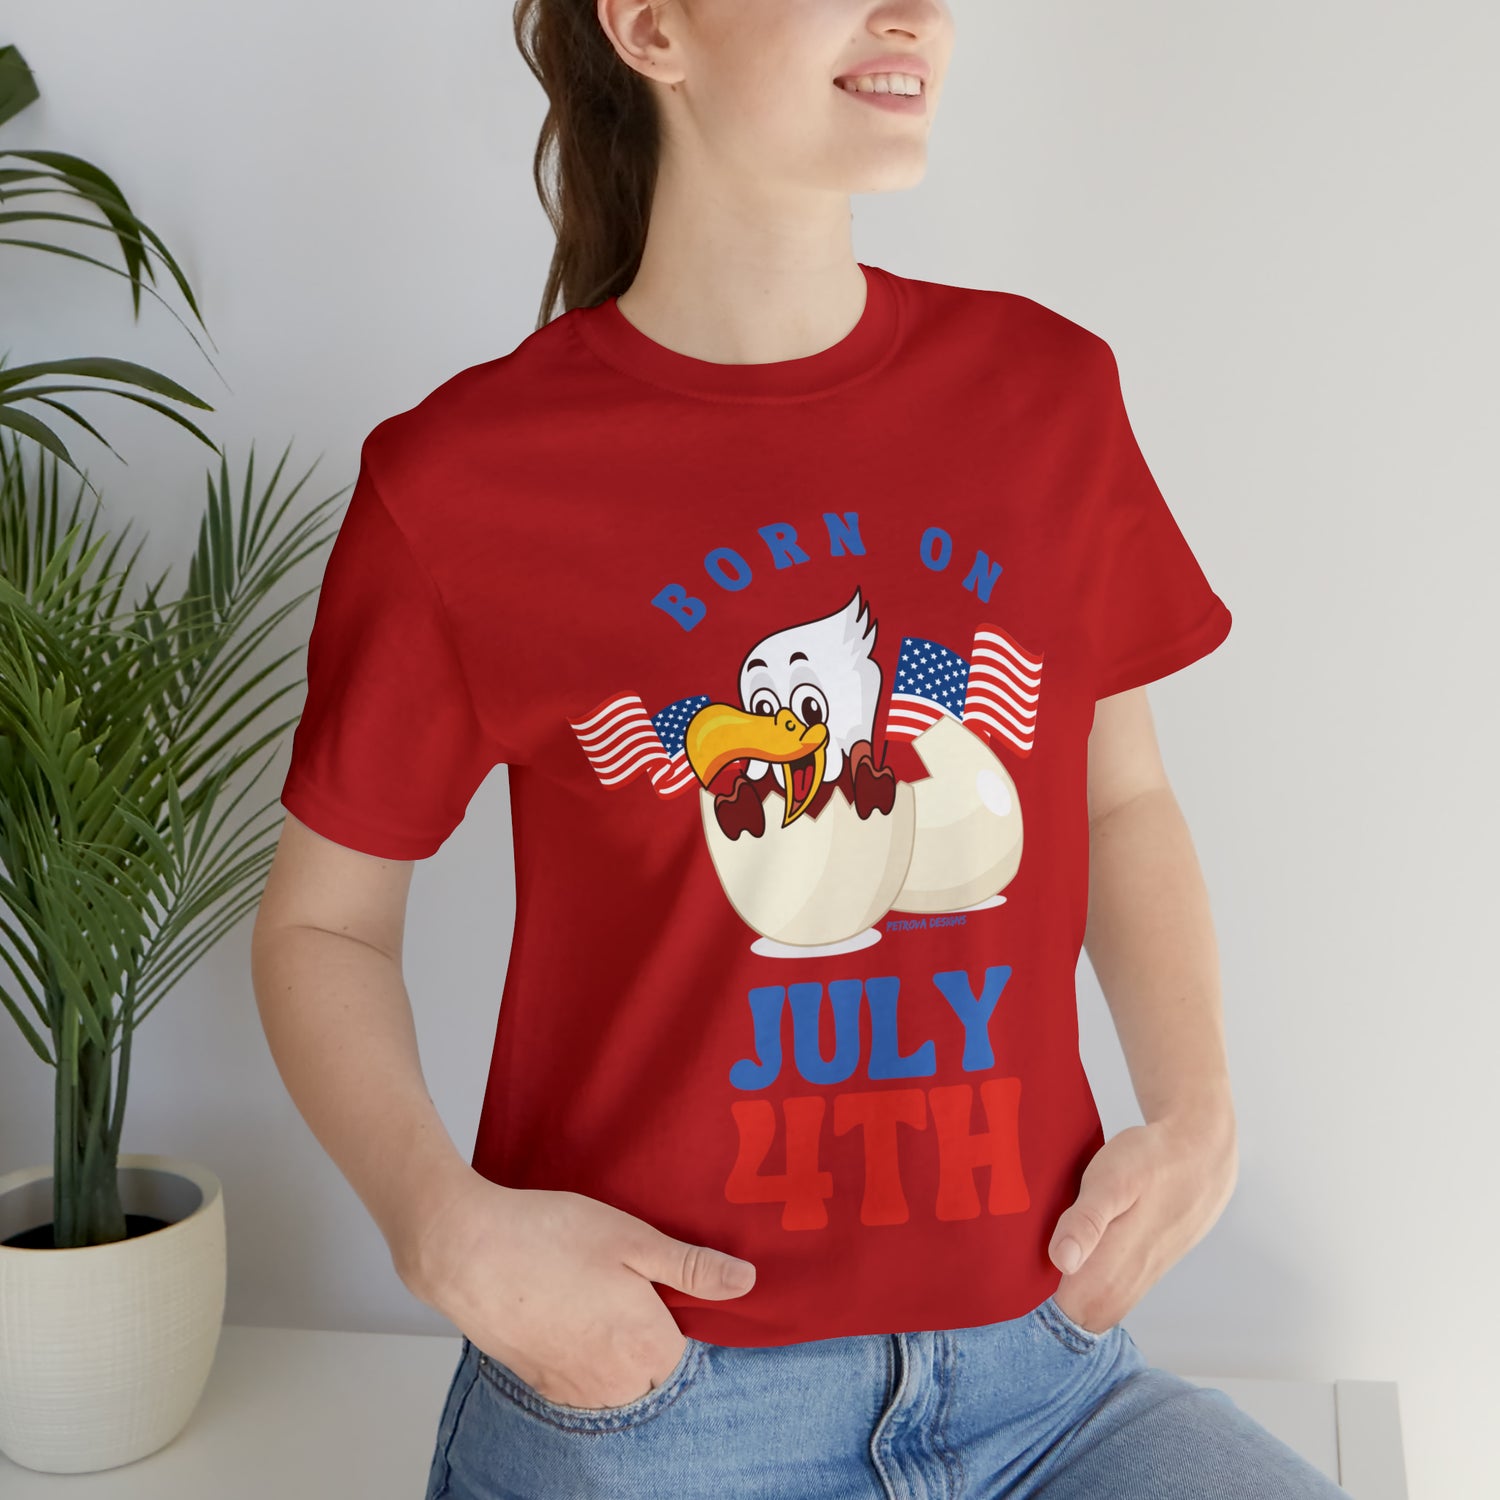 Red T-Shirt Tshirt Design Gift for Friend and Family Short Sleeved Shirt 4th of July Independence Day Petrova Designs